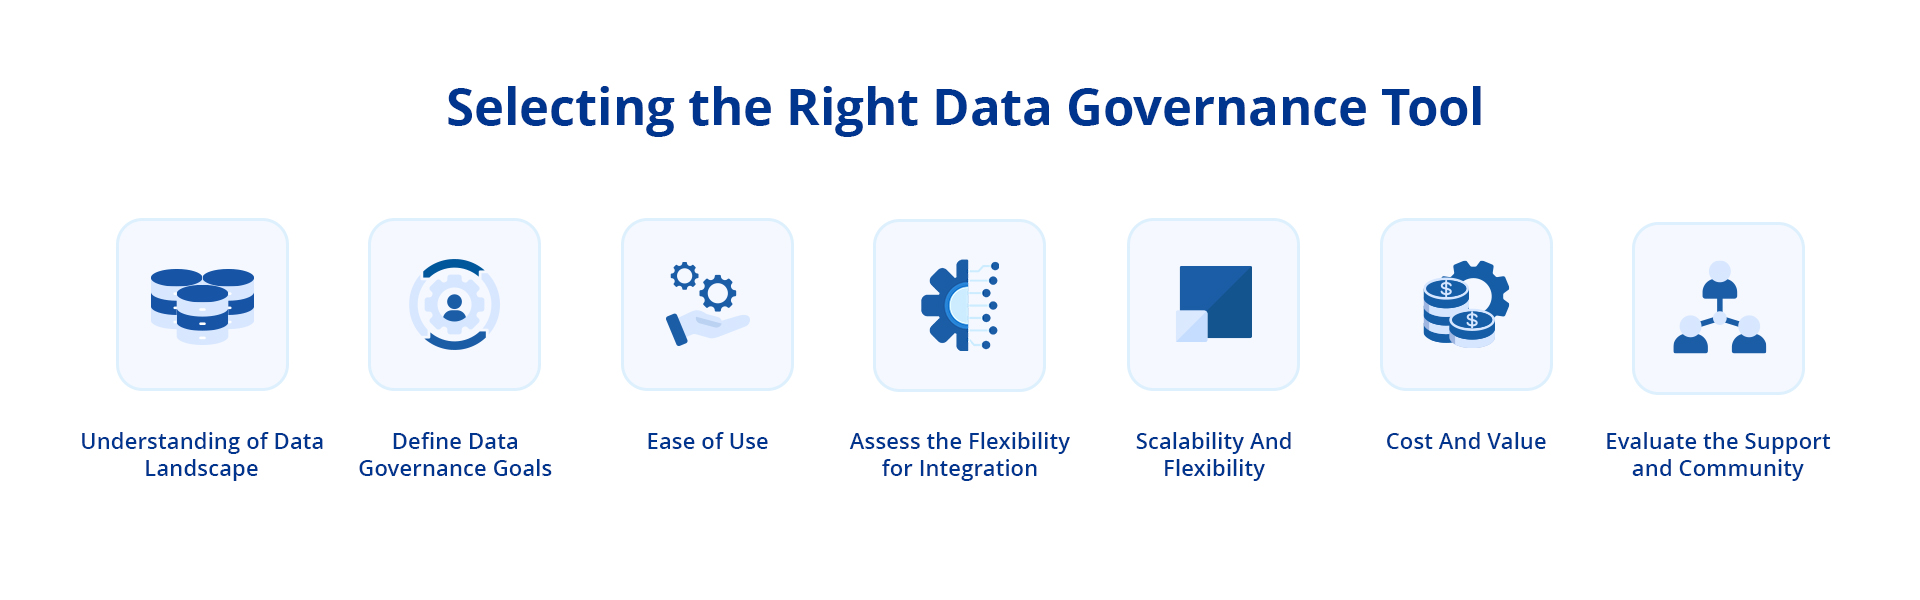 Showing the features to look for in a good data governance tool